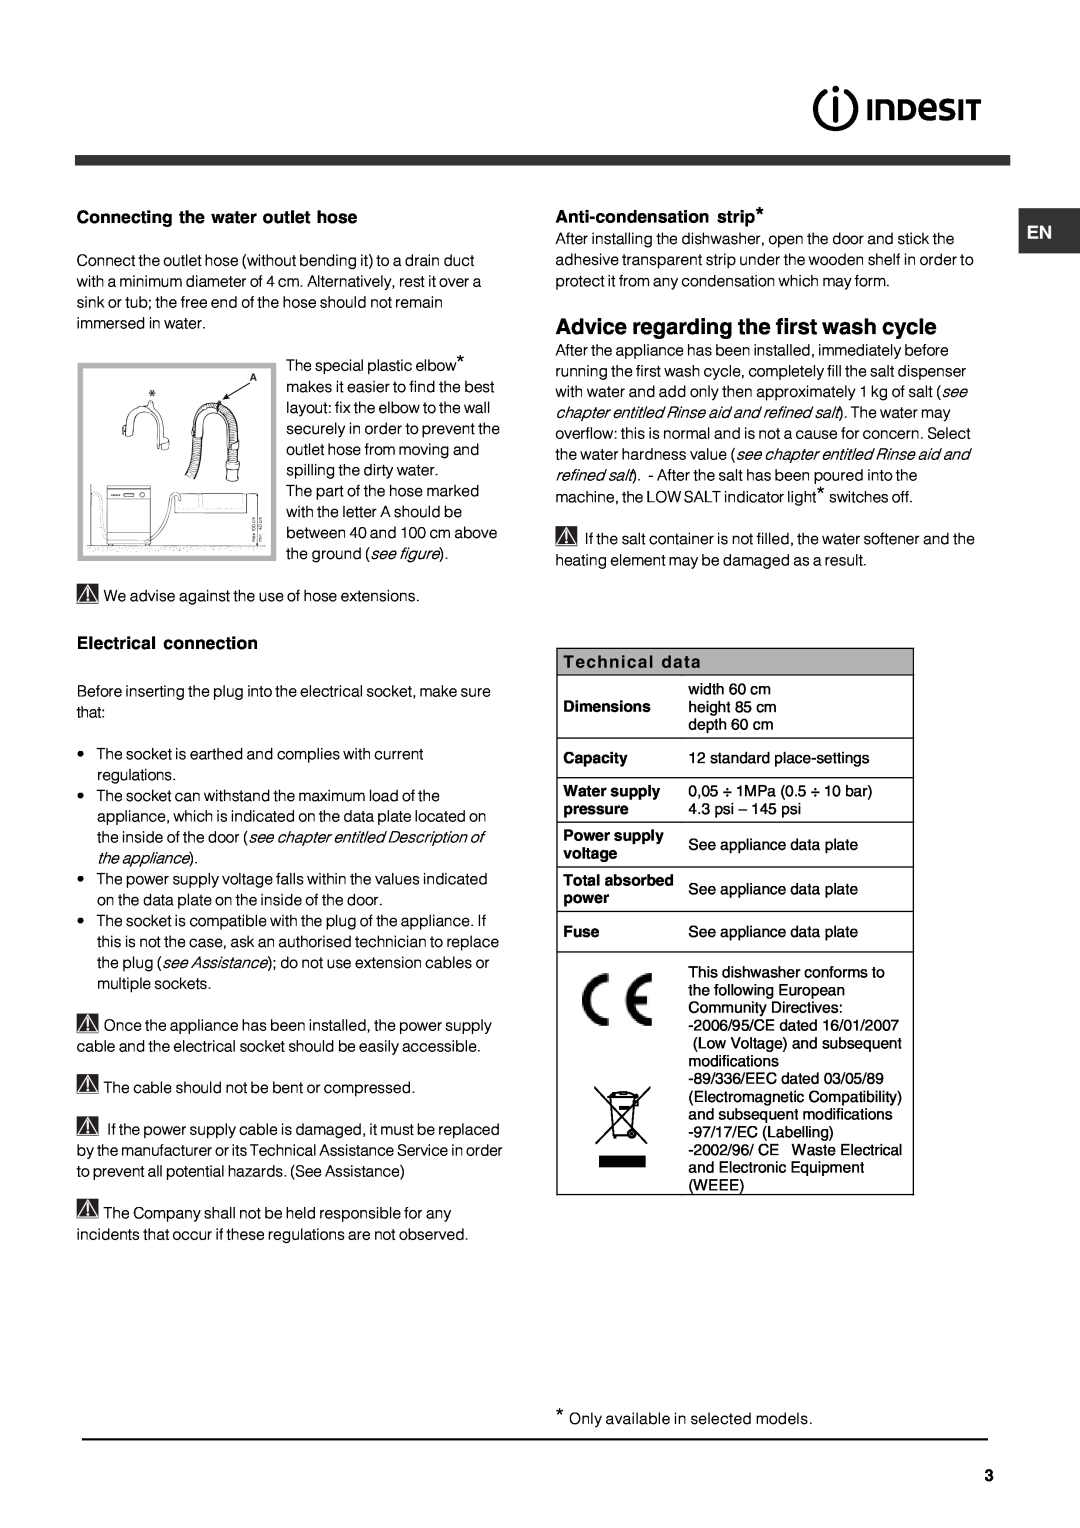 Indesit IDF125 manual Advice regarding the first wash cycle, Technical data 